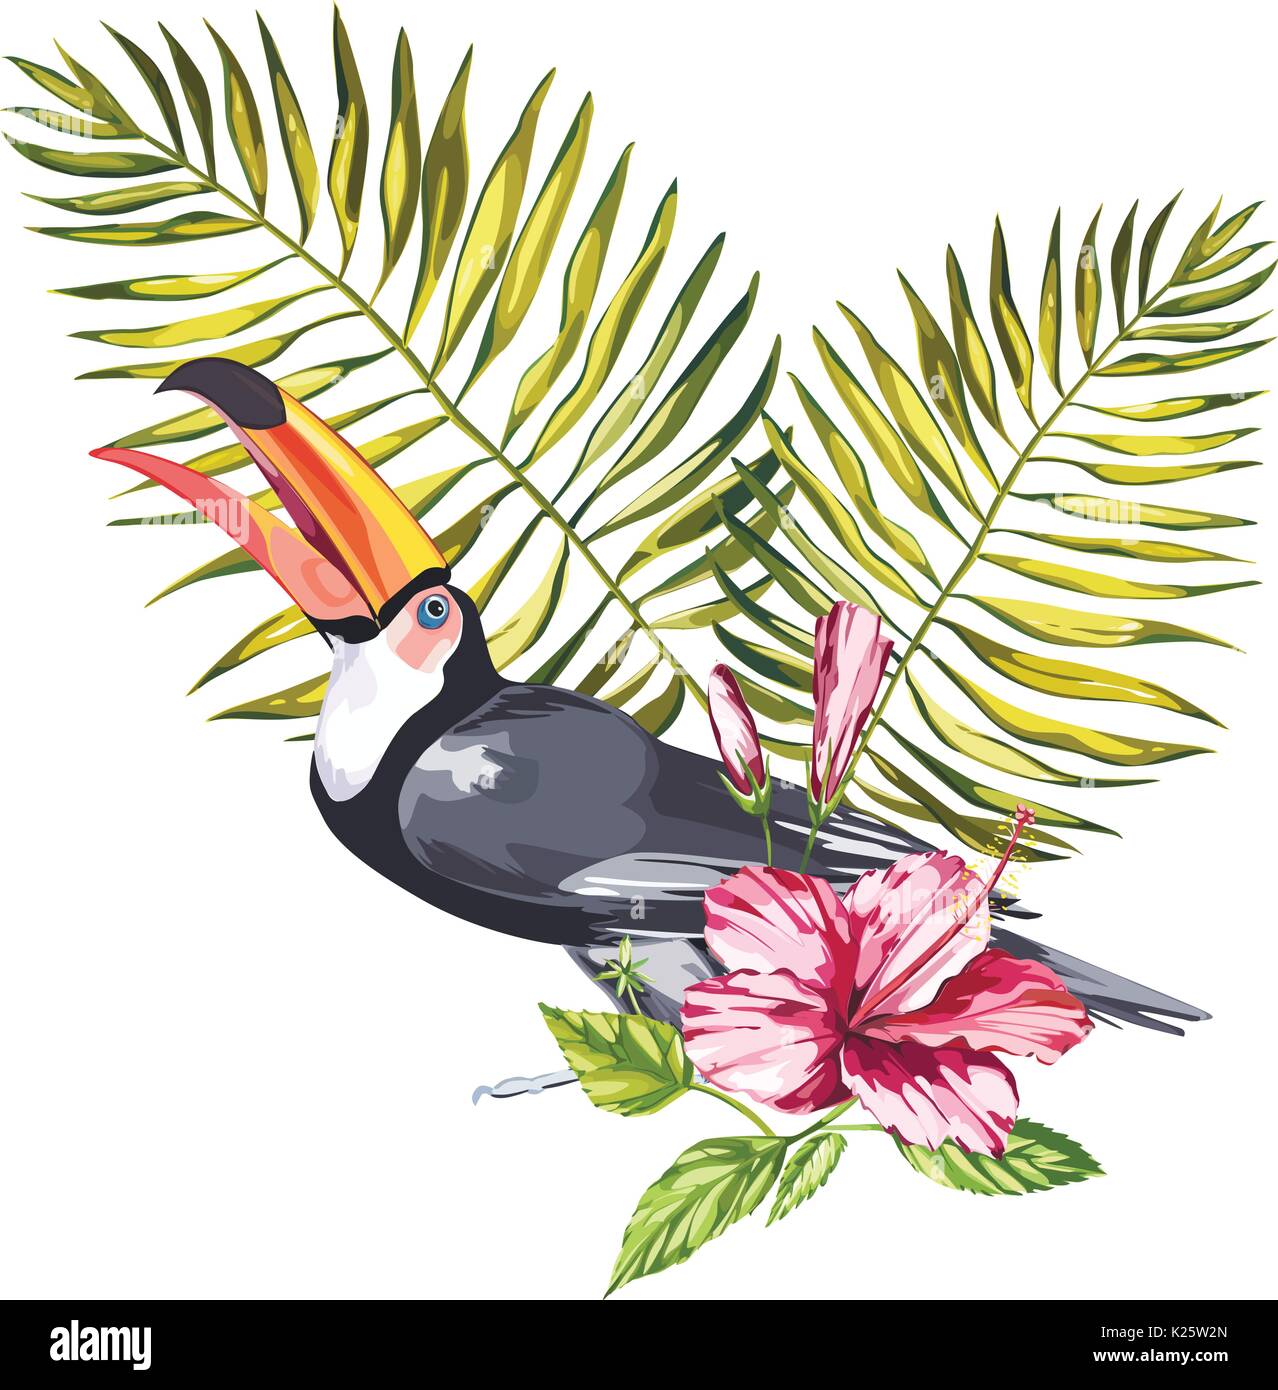 Toucan with tropical flowers and leaf. Element for design of invitations, movie posters, fabrics and other objects. Isolated on white. Stock Vector